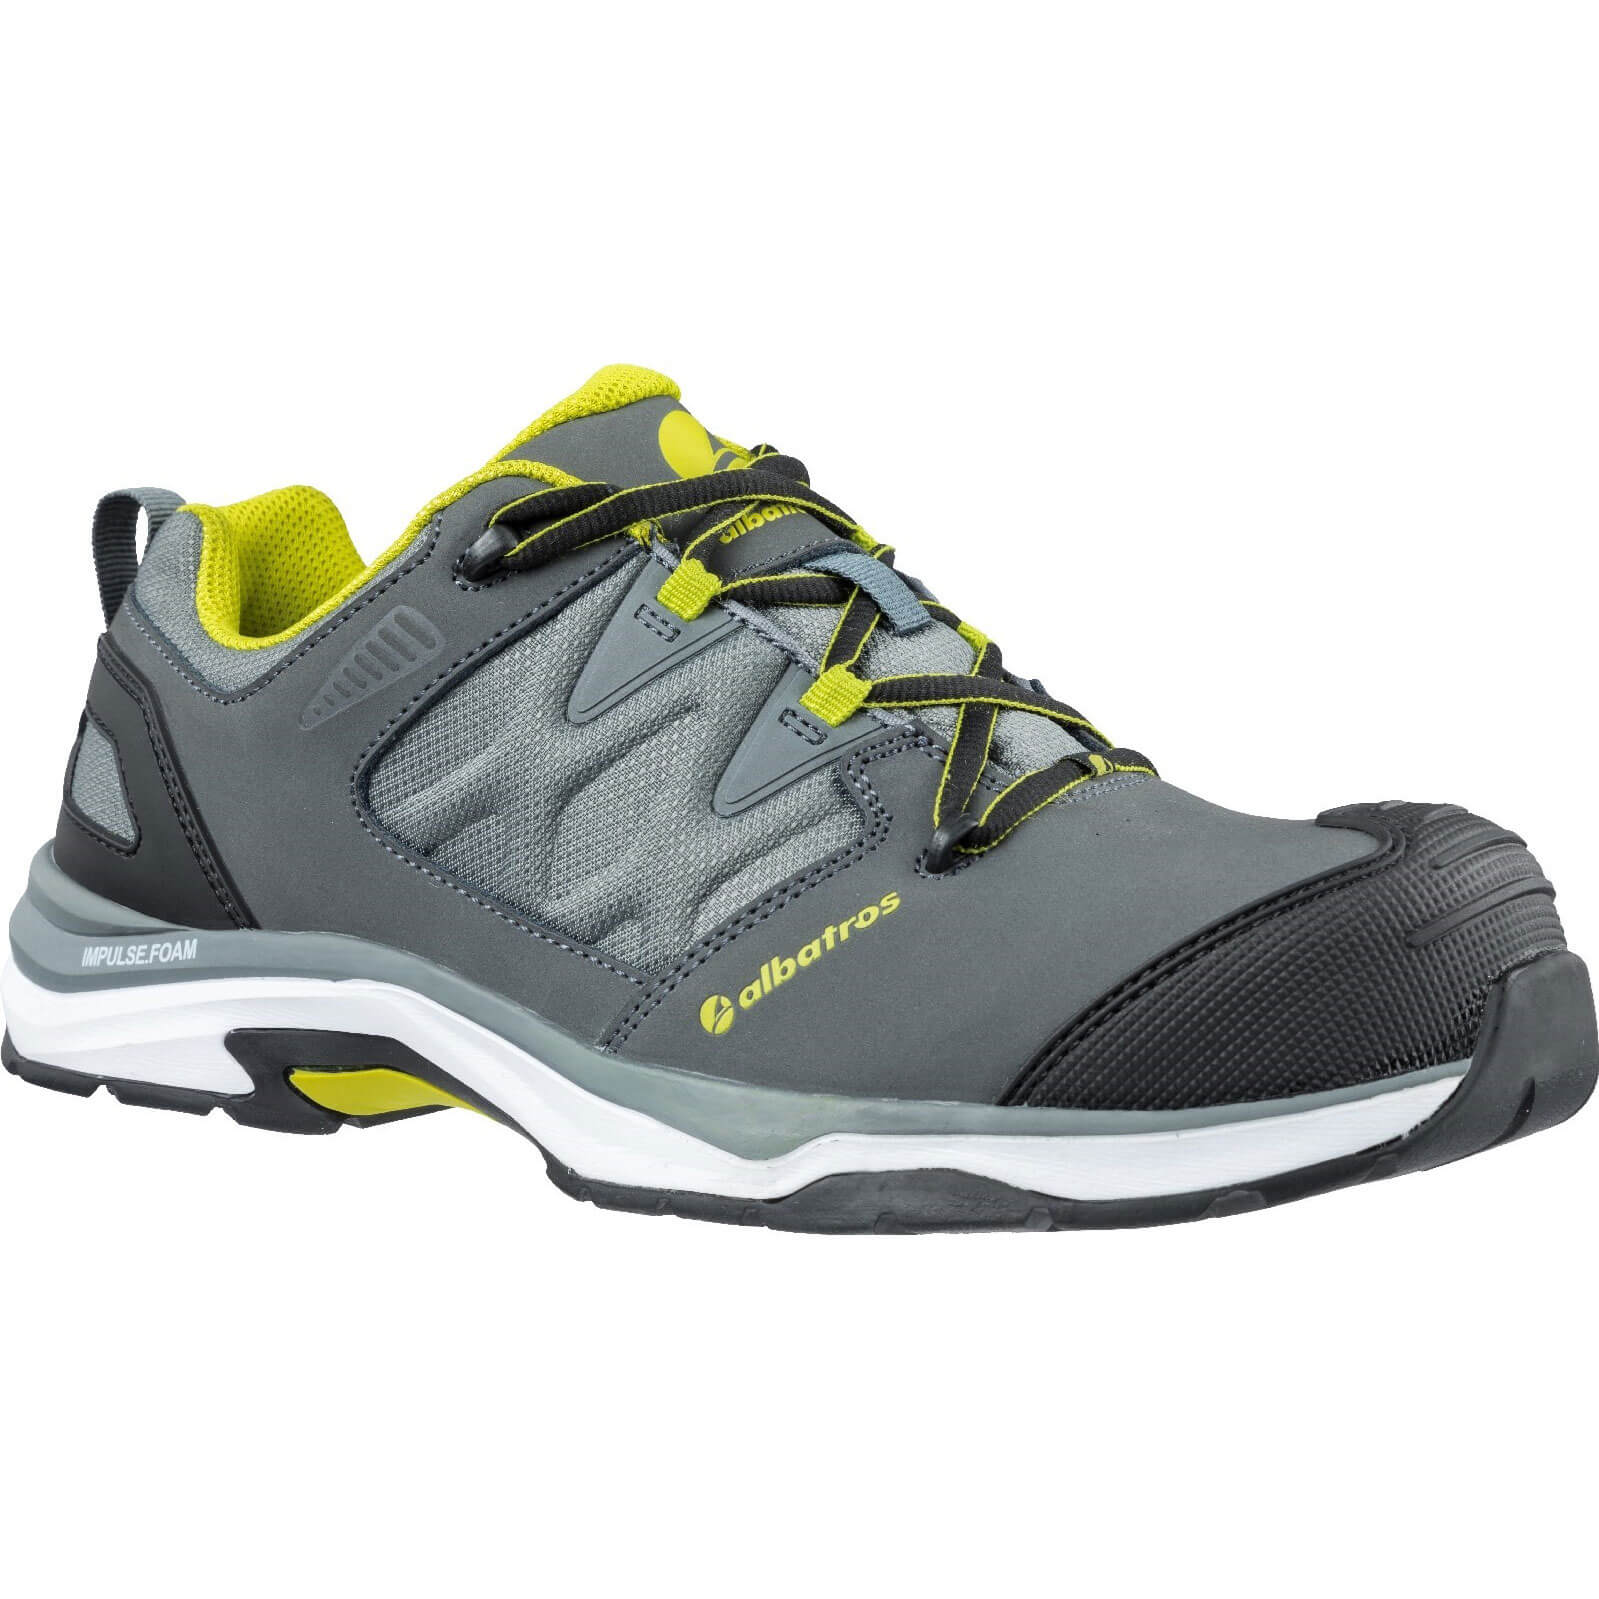 Image of Albatros Ultratrail Low Lace Up Safety Shoe Grey Size 9